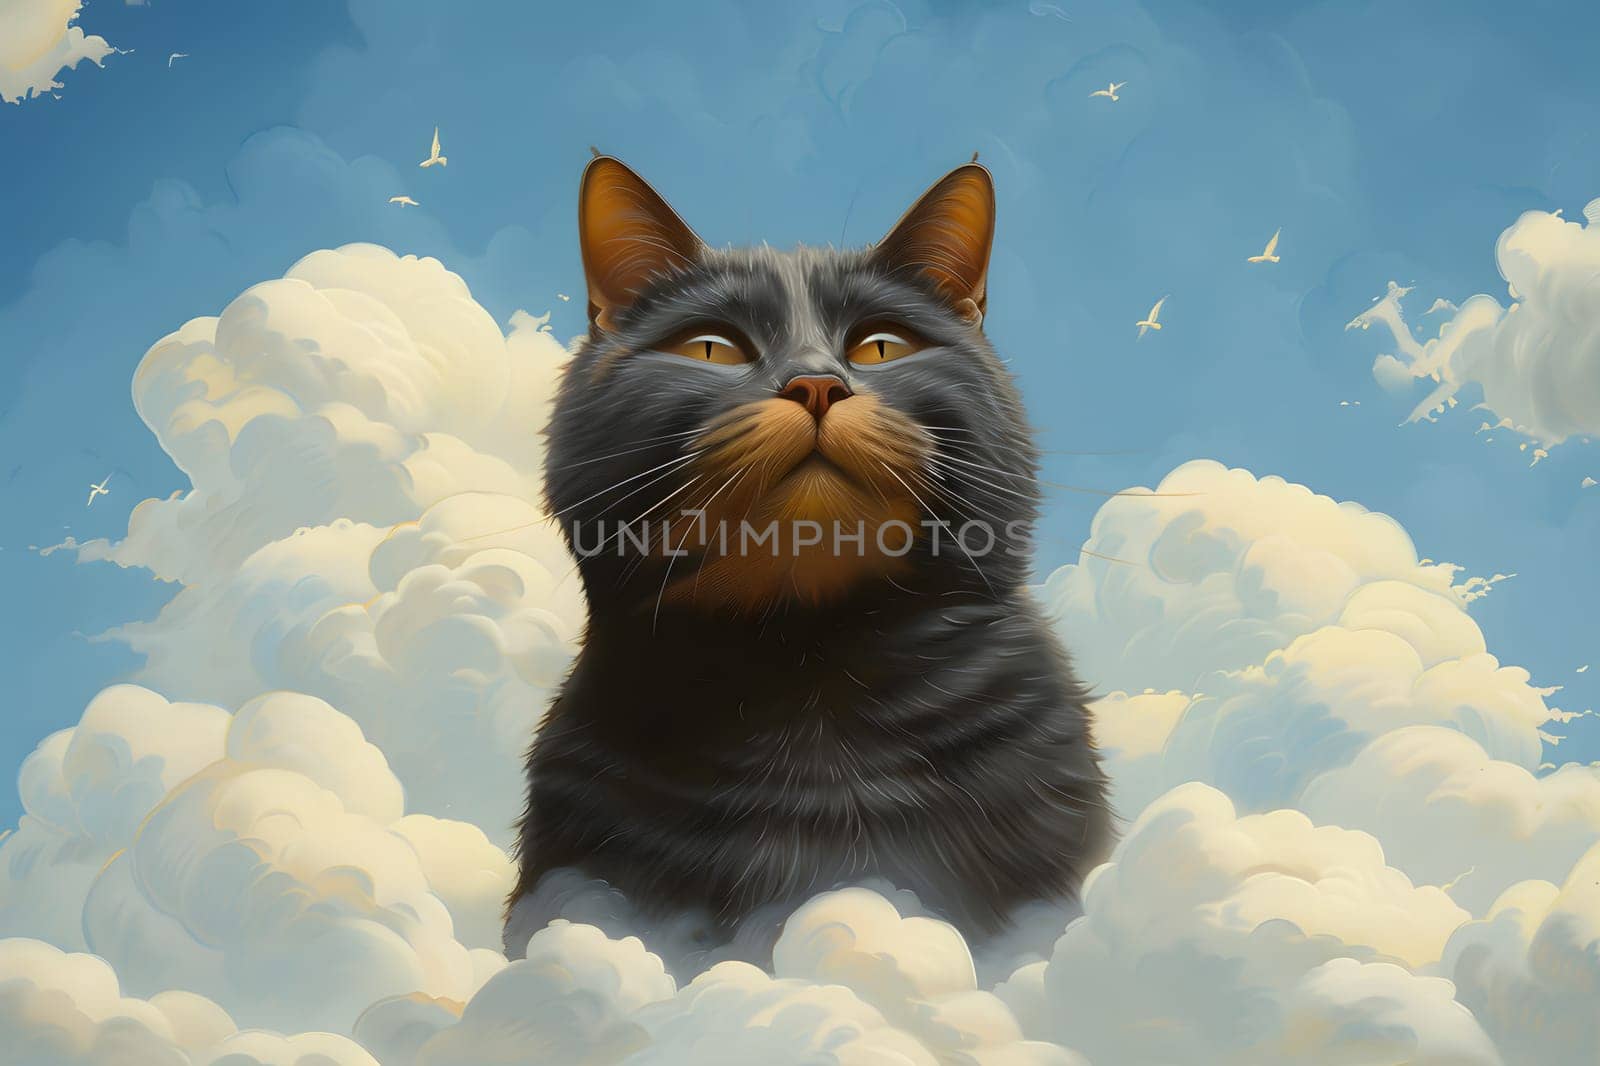 A small to mediumsized cat from the Felidae family is sitting in the cumulus clouds, gazing up at the sky with its whiskers twitching and its carnivorous snout alert